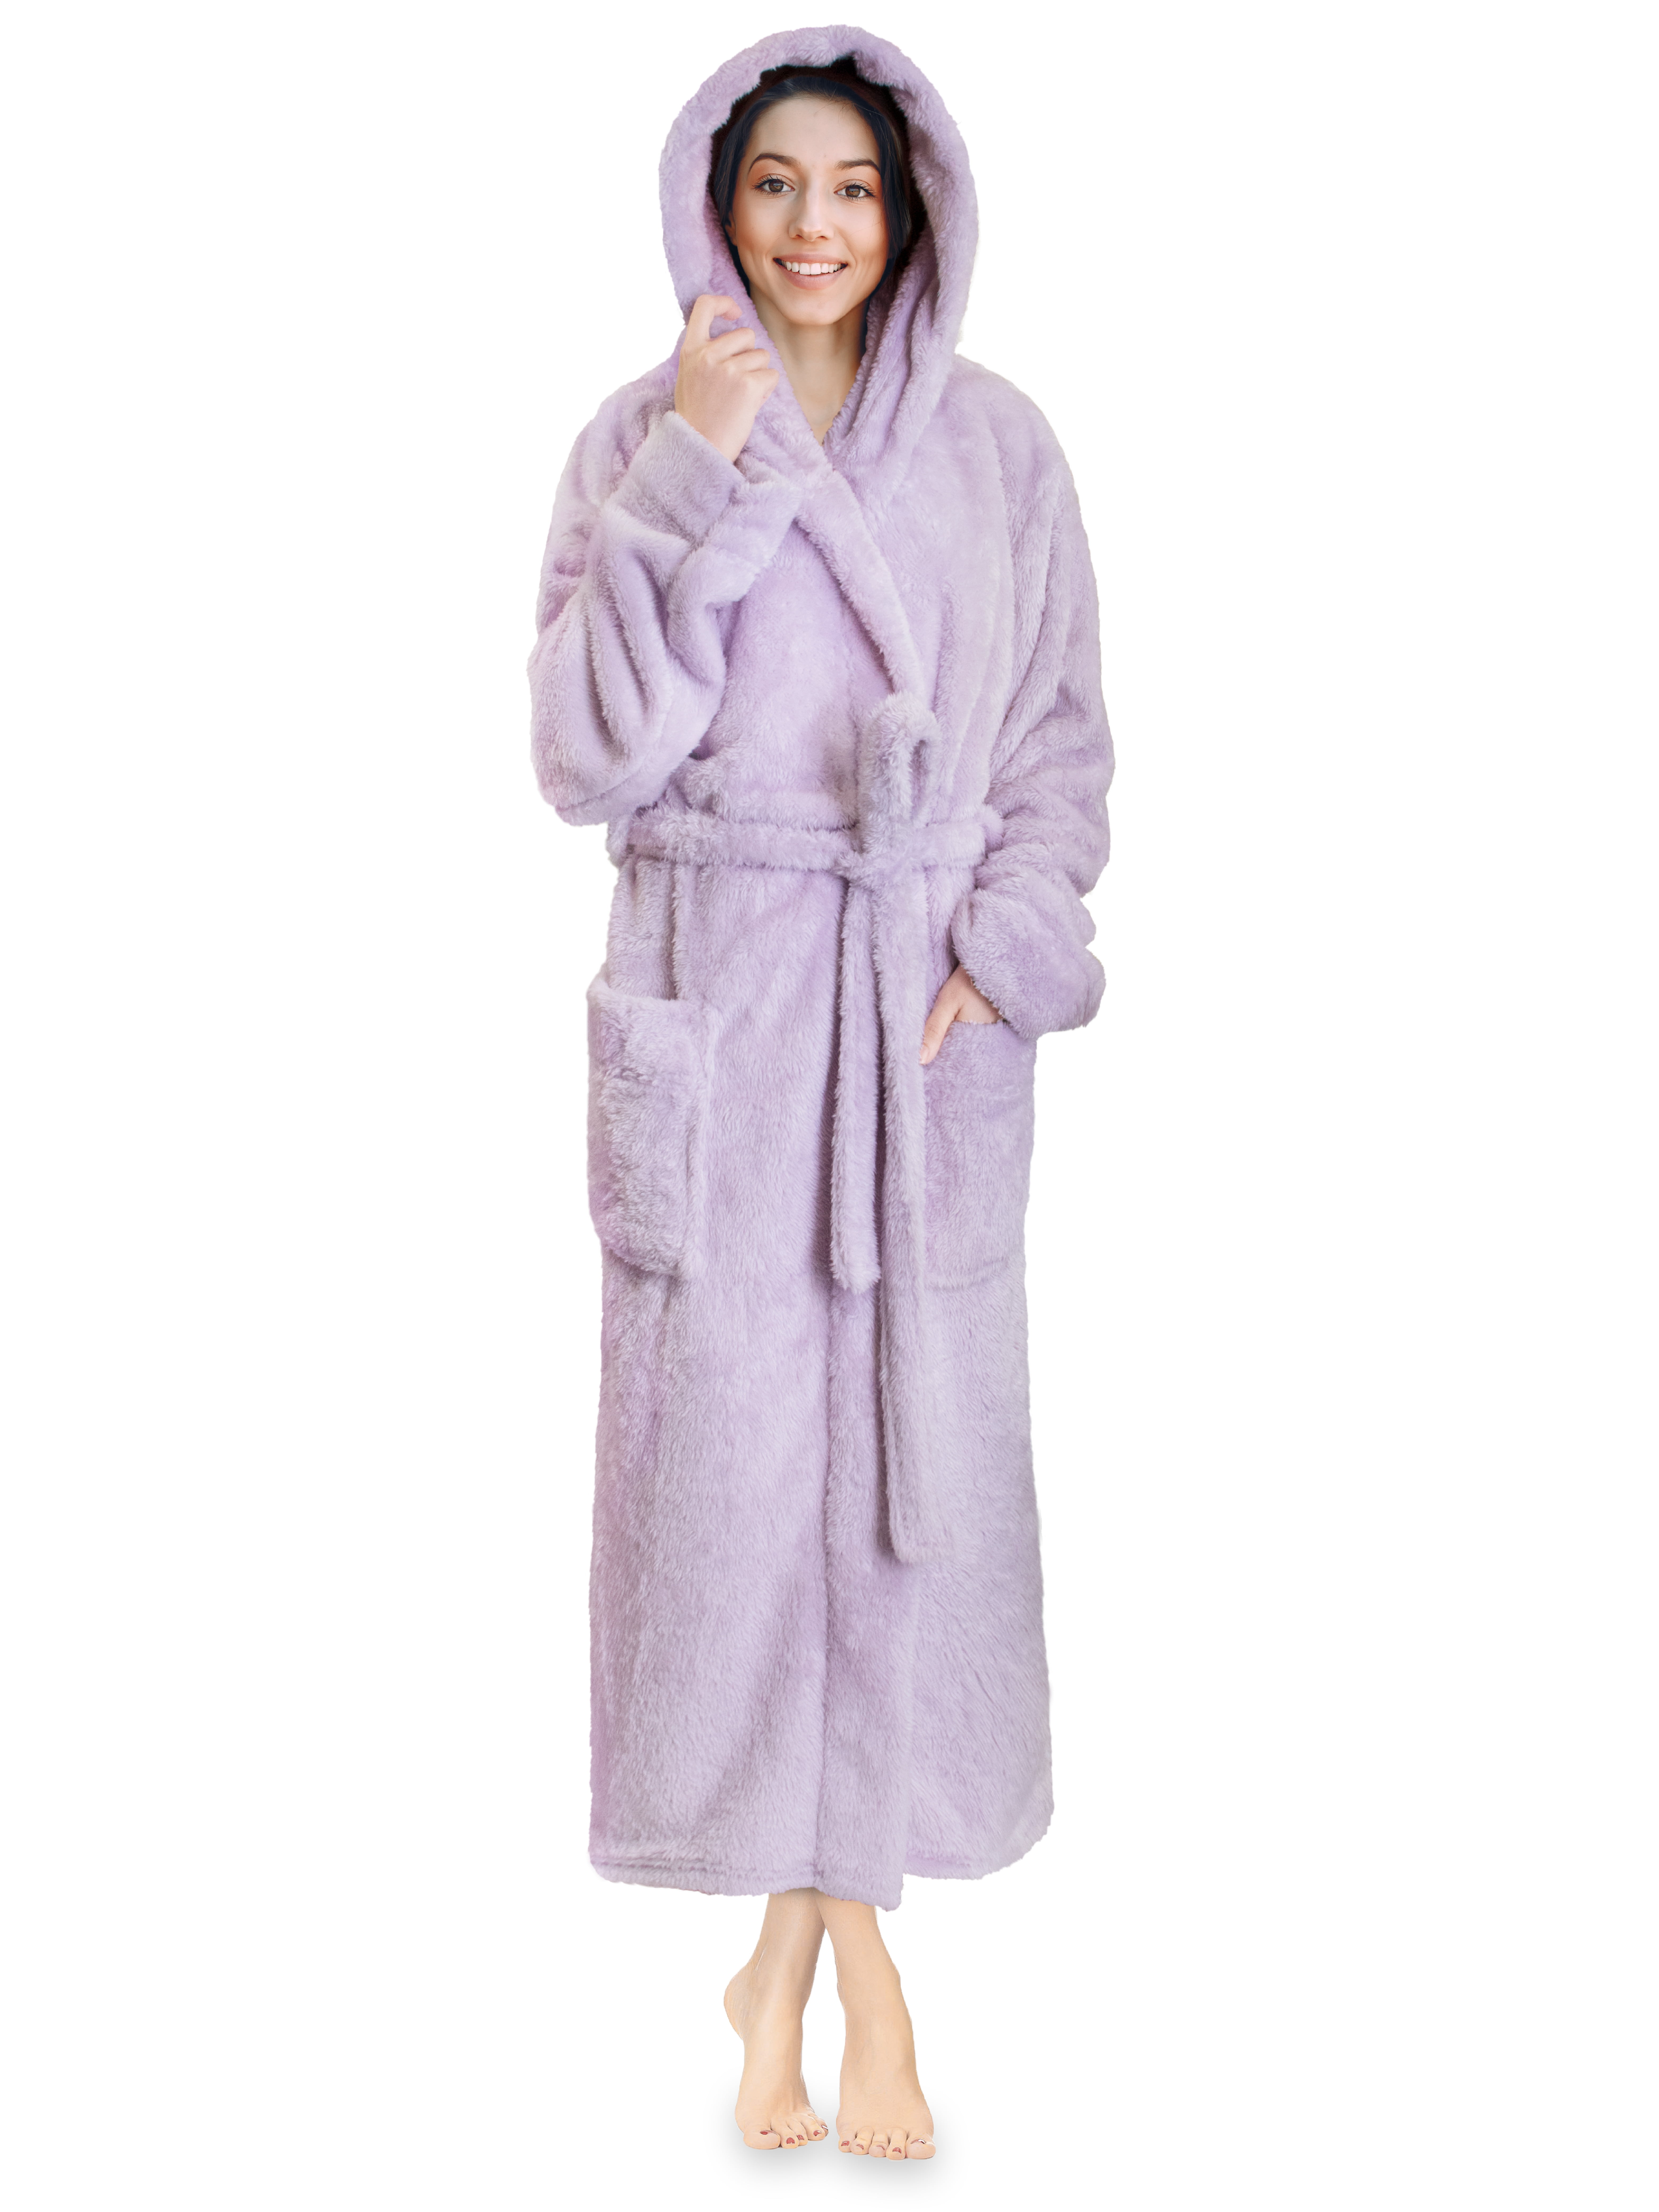 A2Z Girls Fleece Luxury Sherpa Hooded Dressing Gown Star Print Pink Bathrobe Super Soft Robe Gift for Girls Age 7 to 13 Years